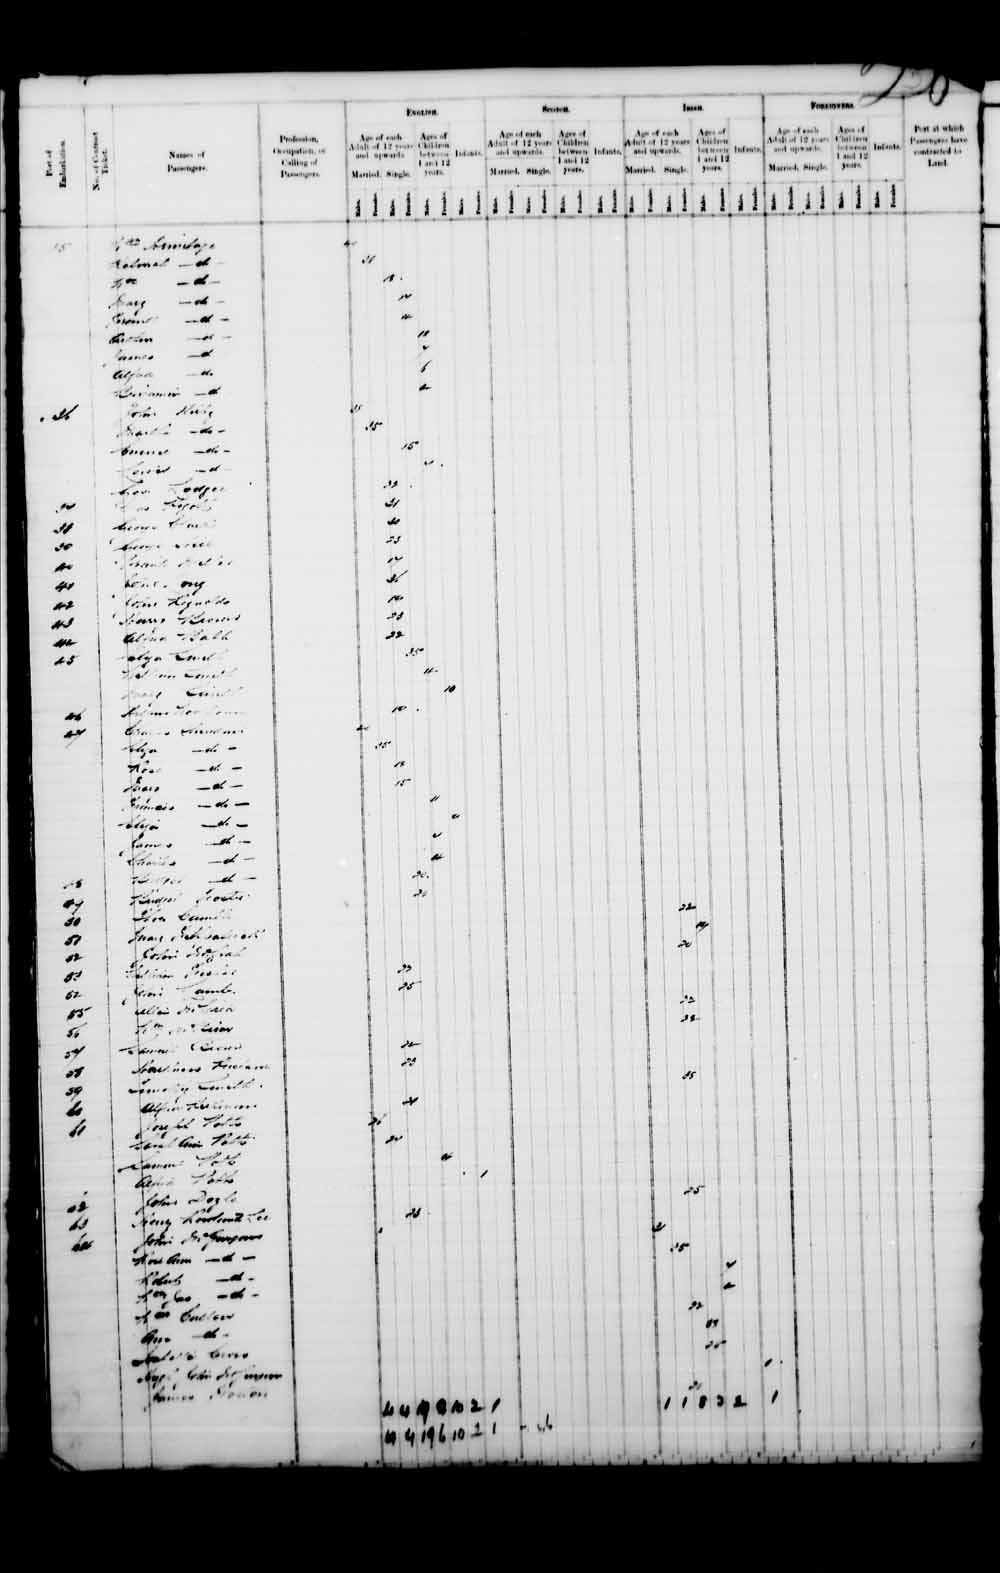 Digitized page of Passenger Lists for Image No.: e003541617